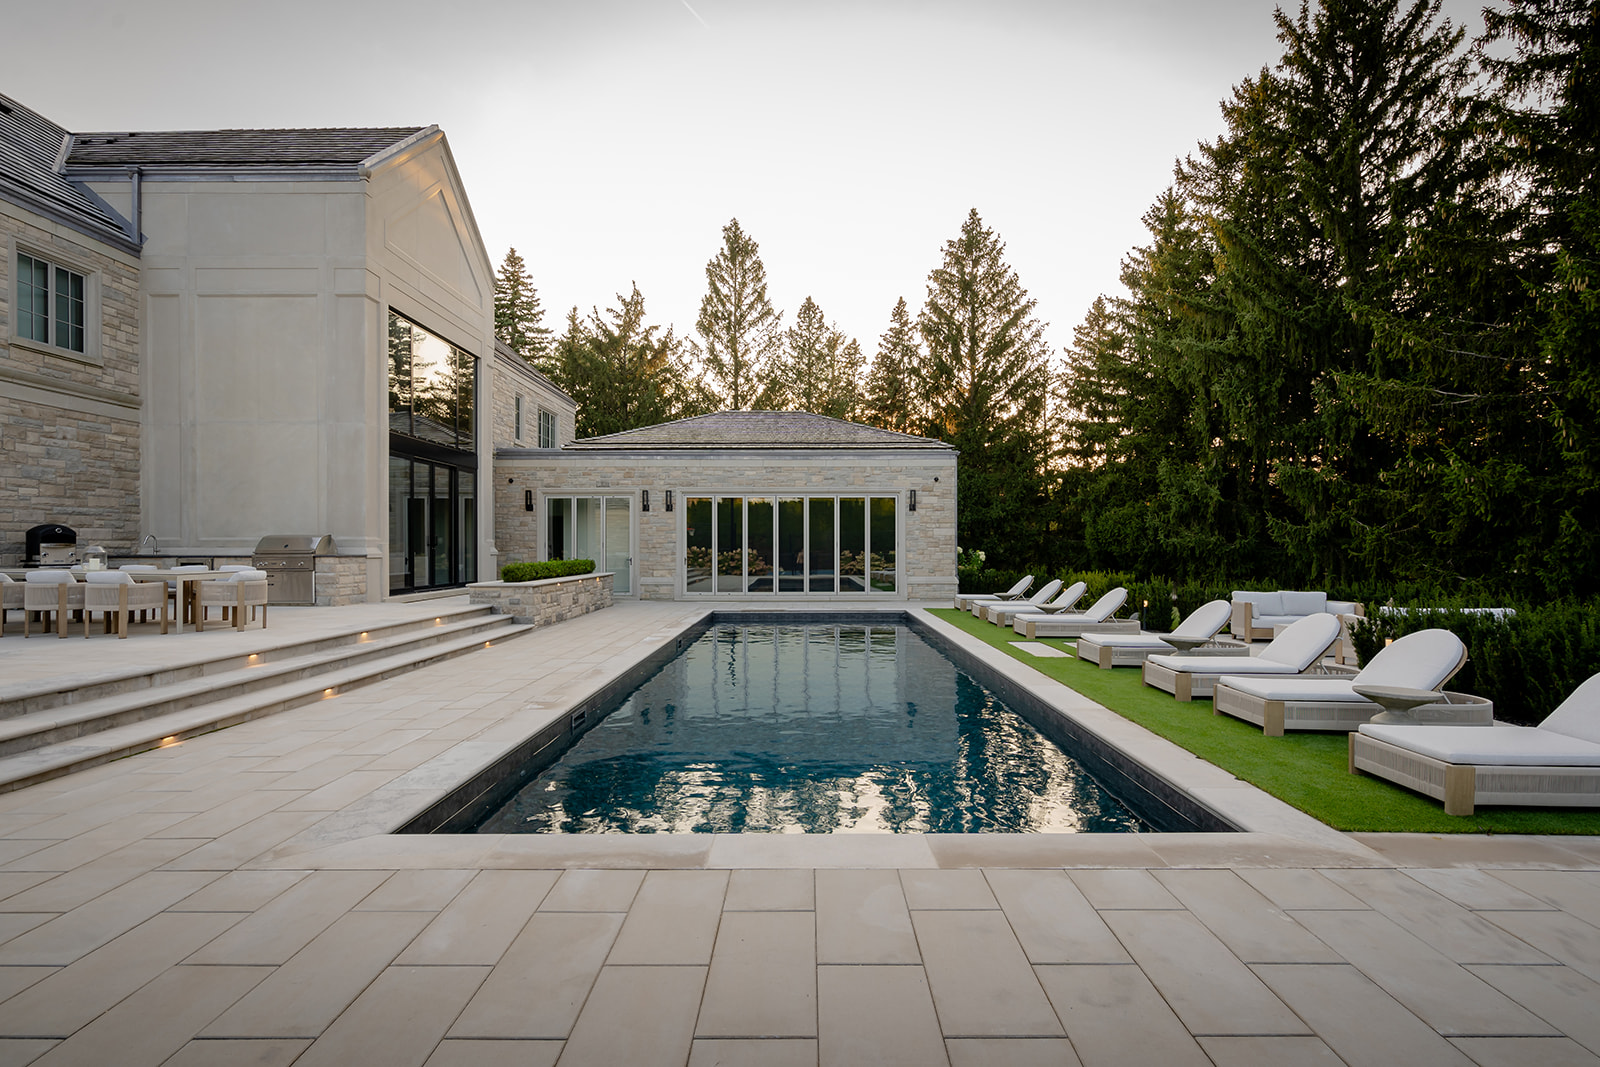 An inground pool with outdoor furniture on the right and the house on the left.